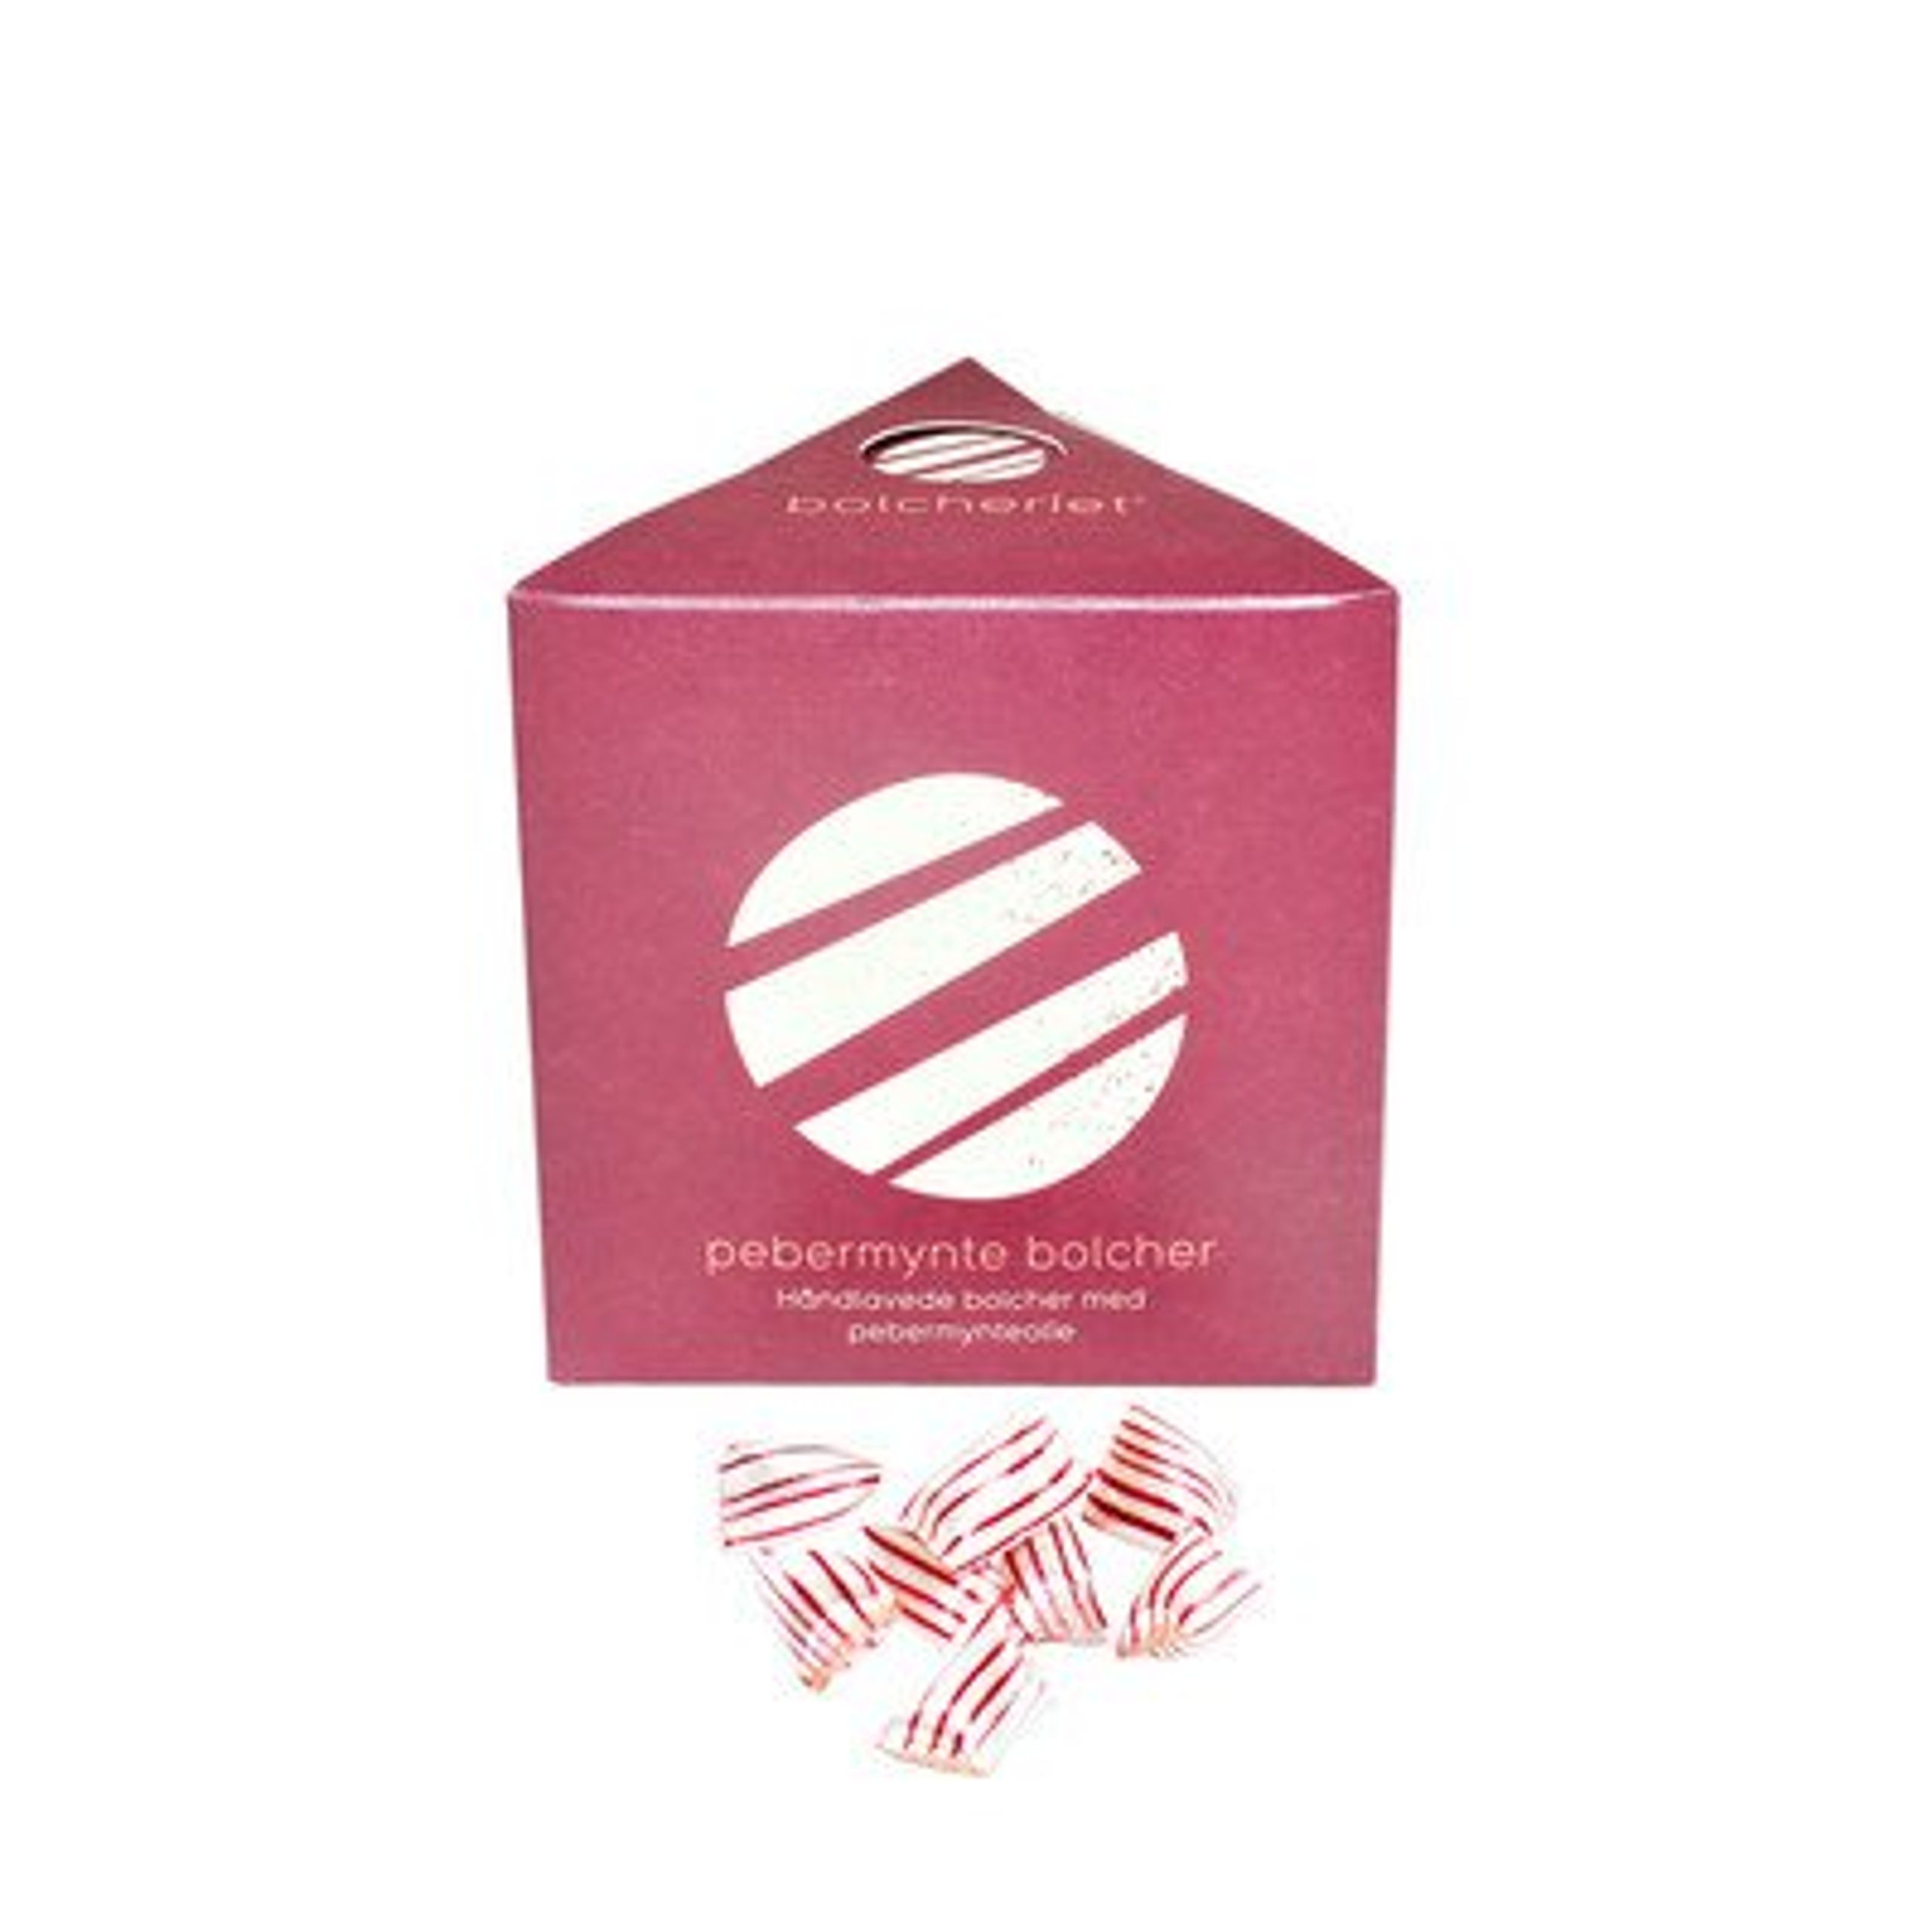 bolcheriet - Sweets - Peppermint Sweets - Peppermint